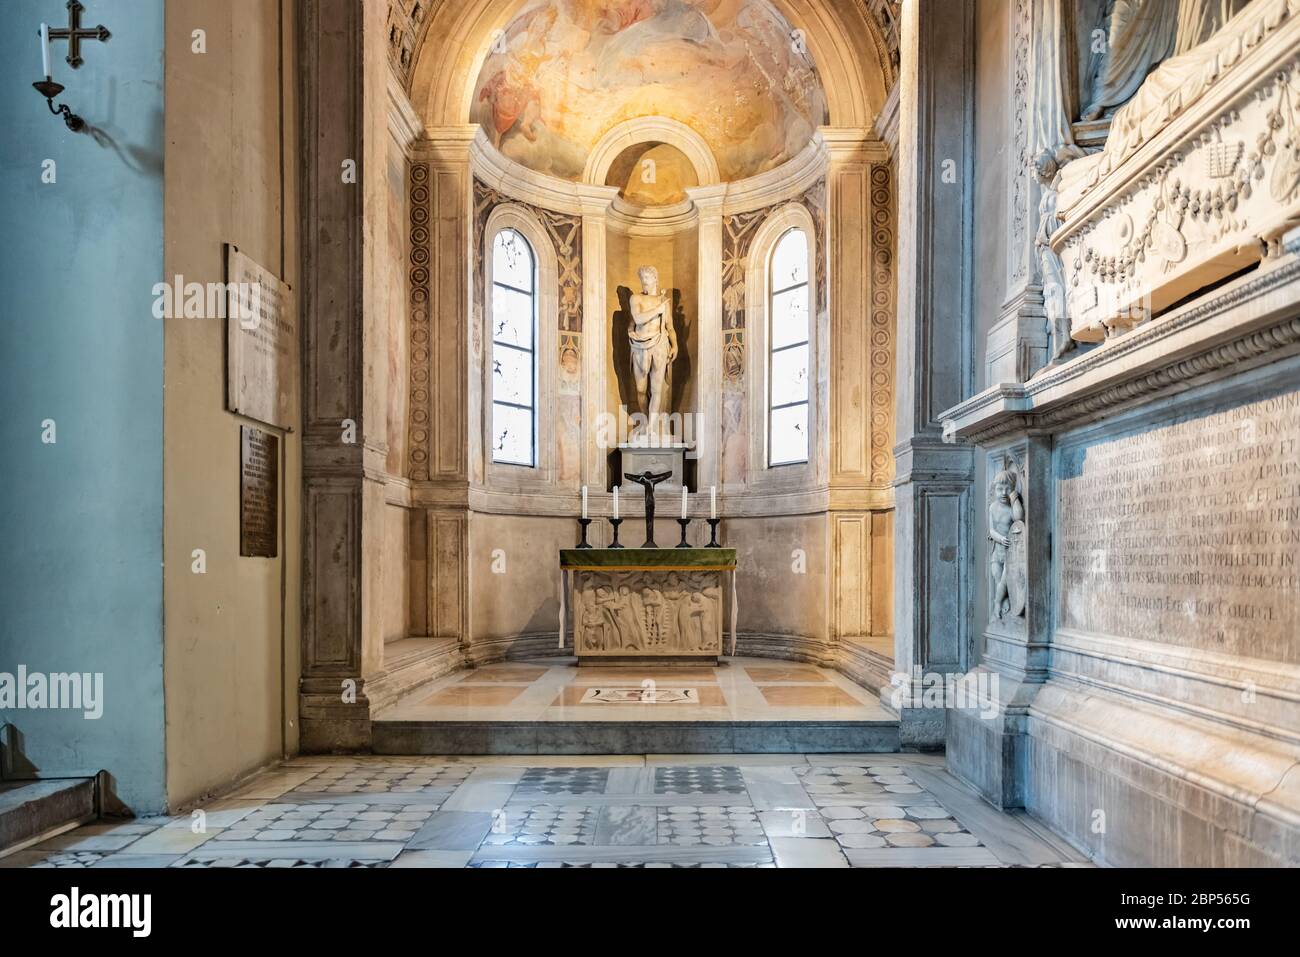 Rome, Italy - August 30, 2014: View at the altar in  side apse and frescos in Basilica di San Clemente, Saint, Clement, in Rome, Italy. Stock Photo